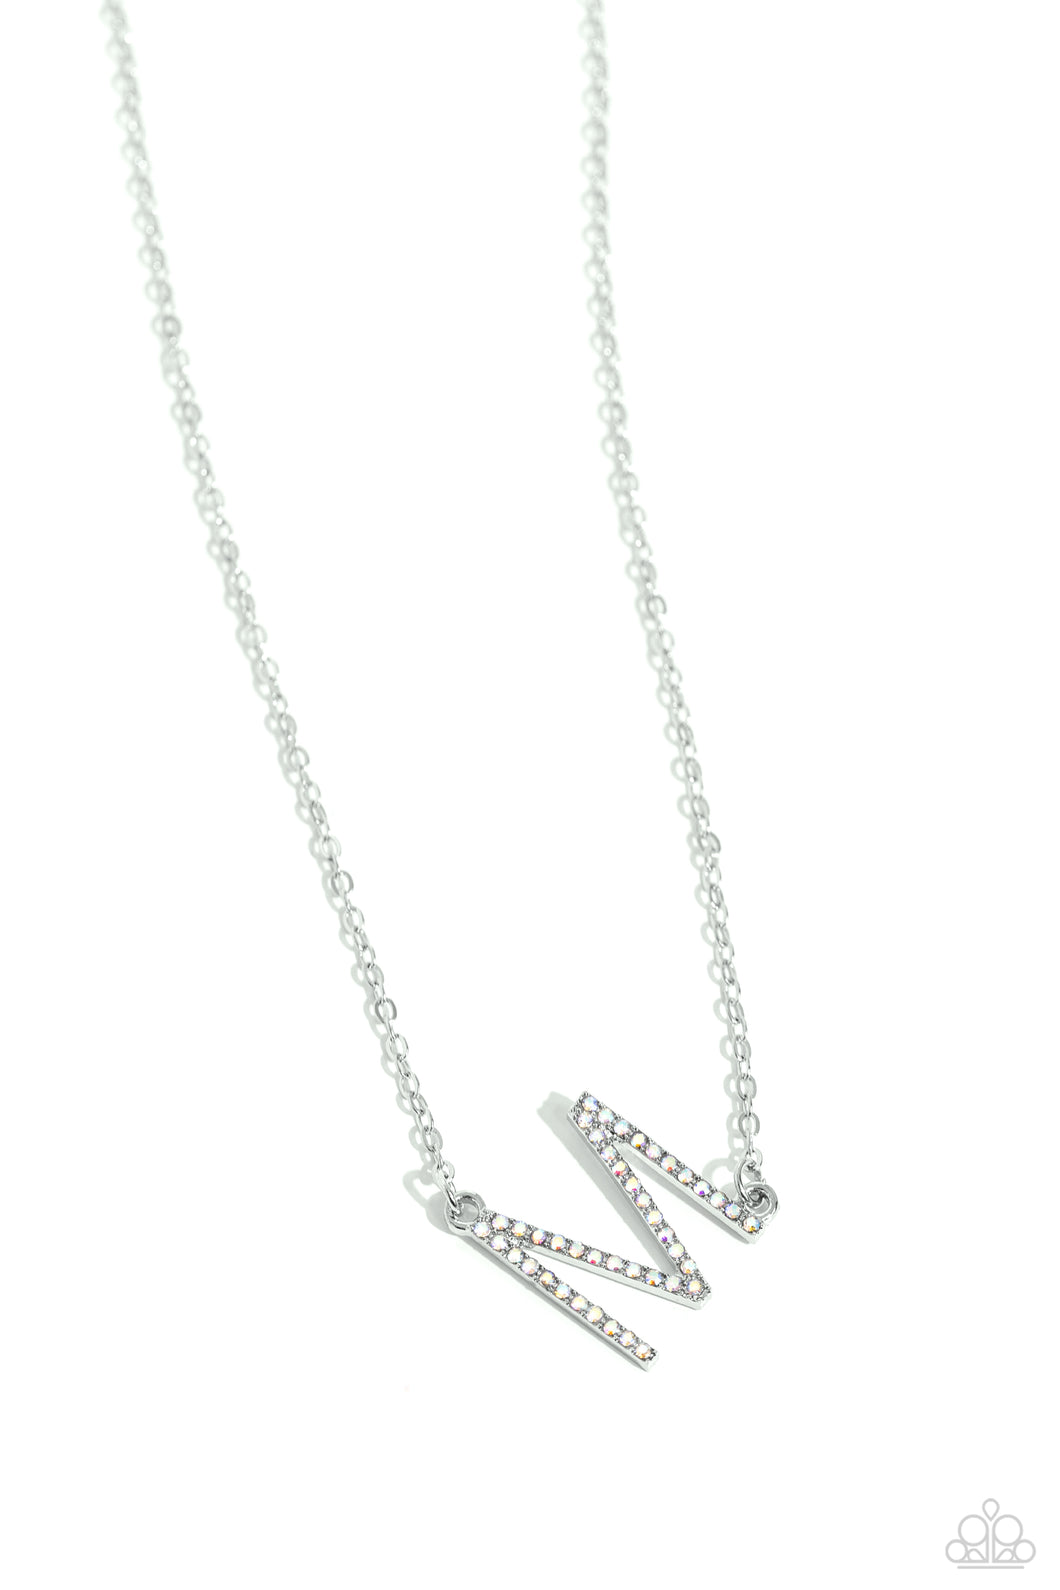 Paparazzi Accessories - INITIALLY Yours - M - White Necklace - Bling By Titia BOutique